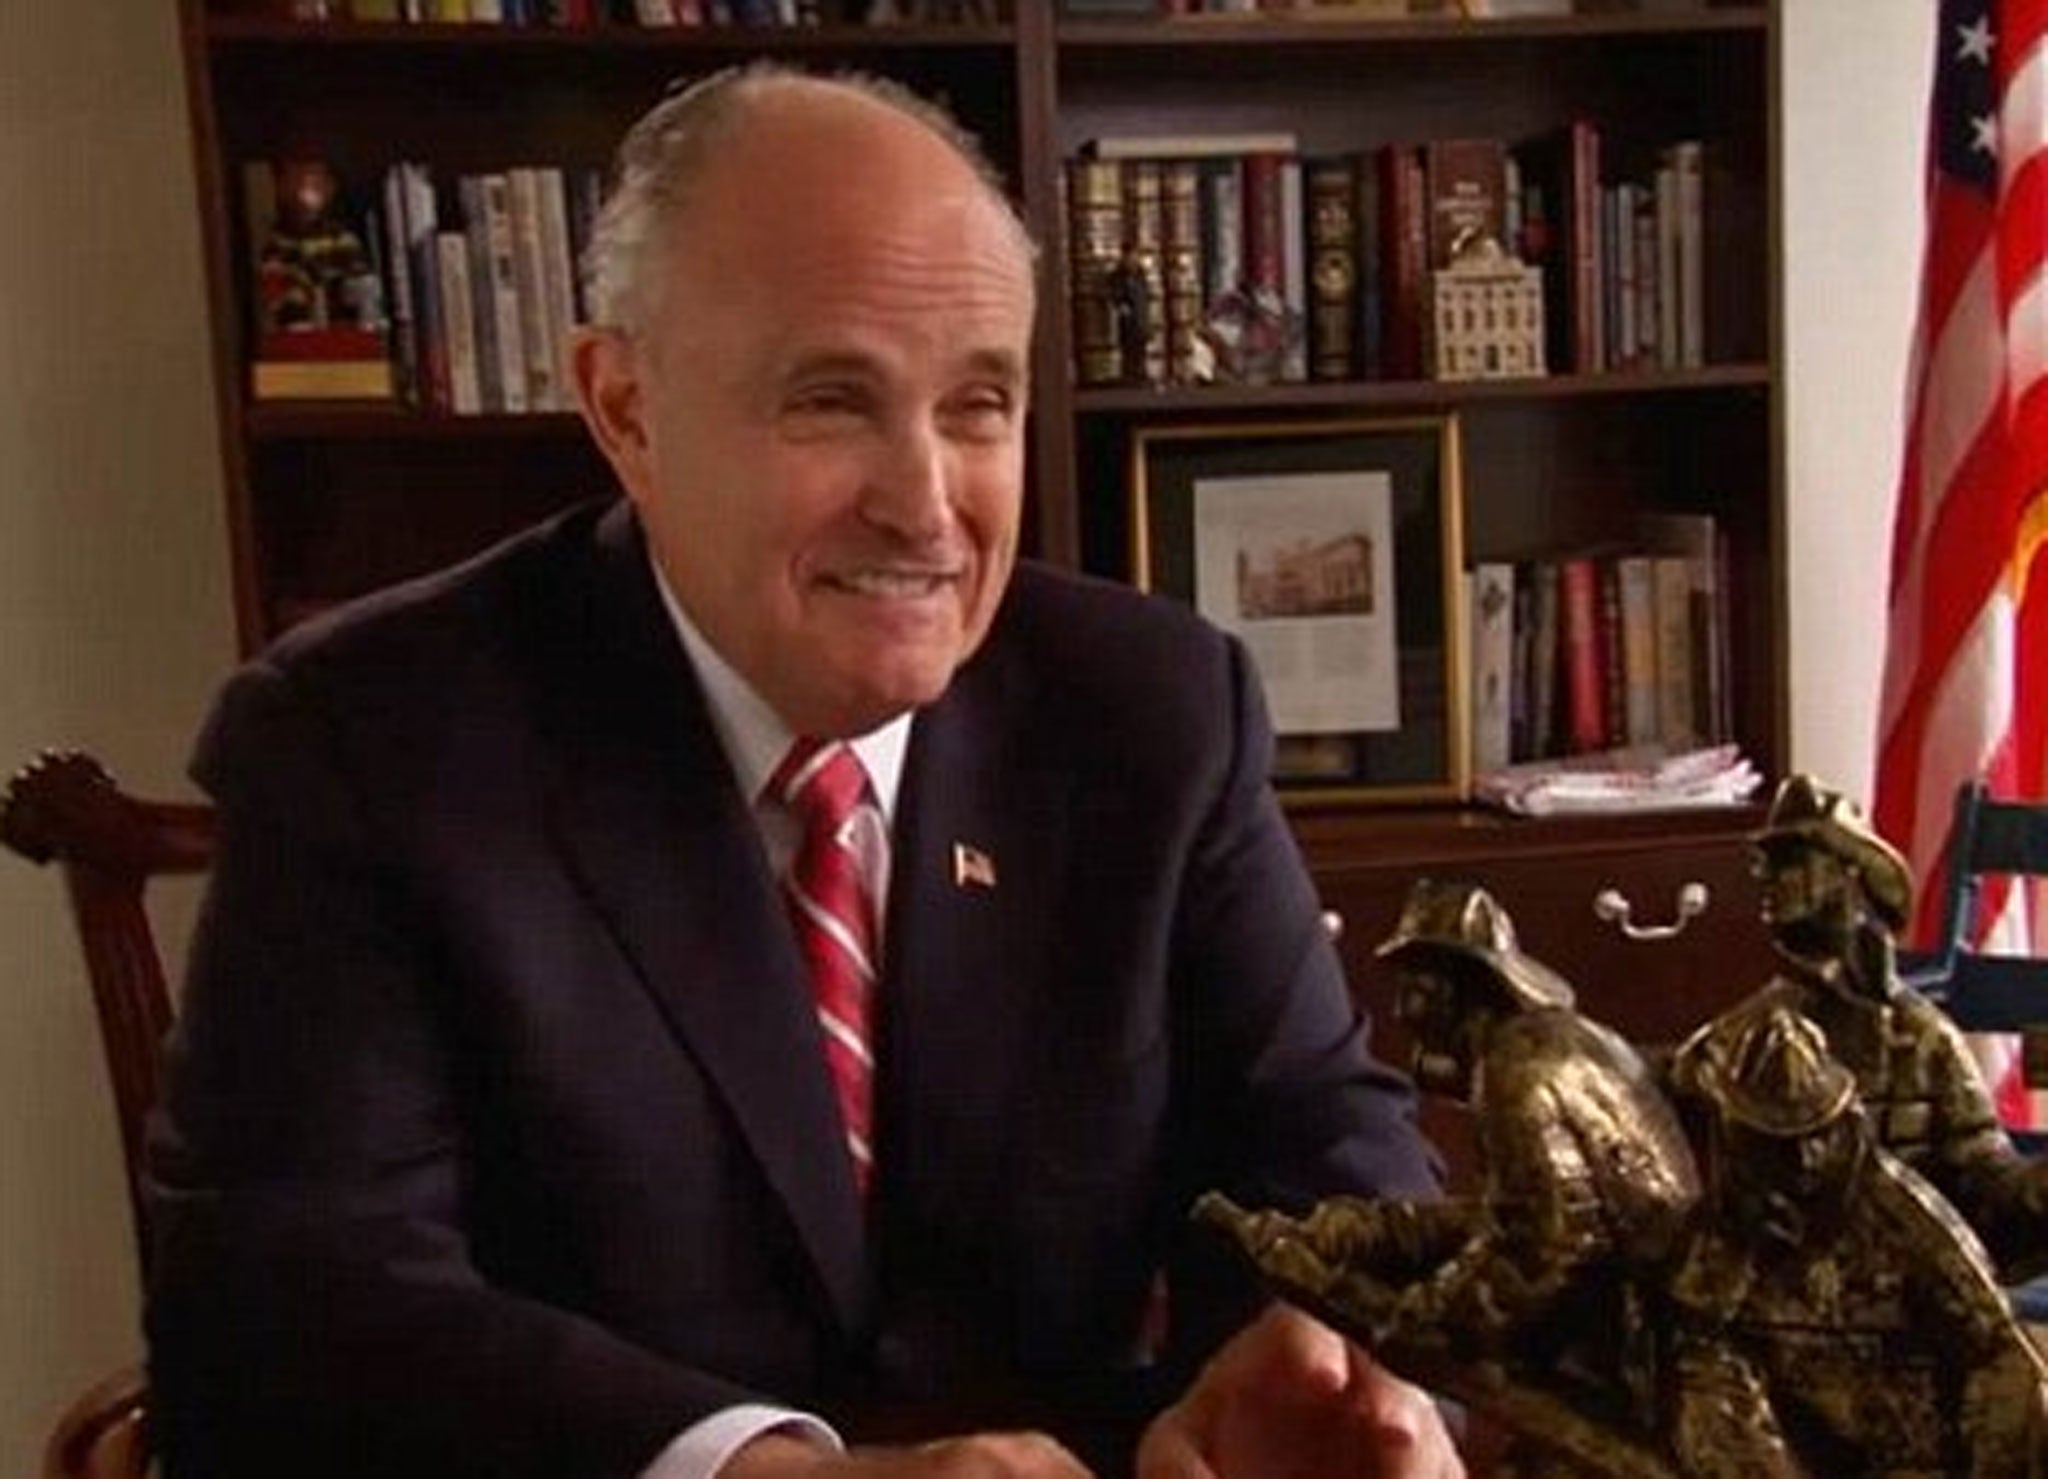 Mr Giuliani hinted at running for president himself before endorsing Mr Trump